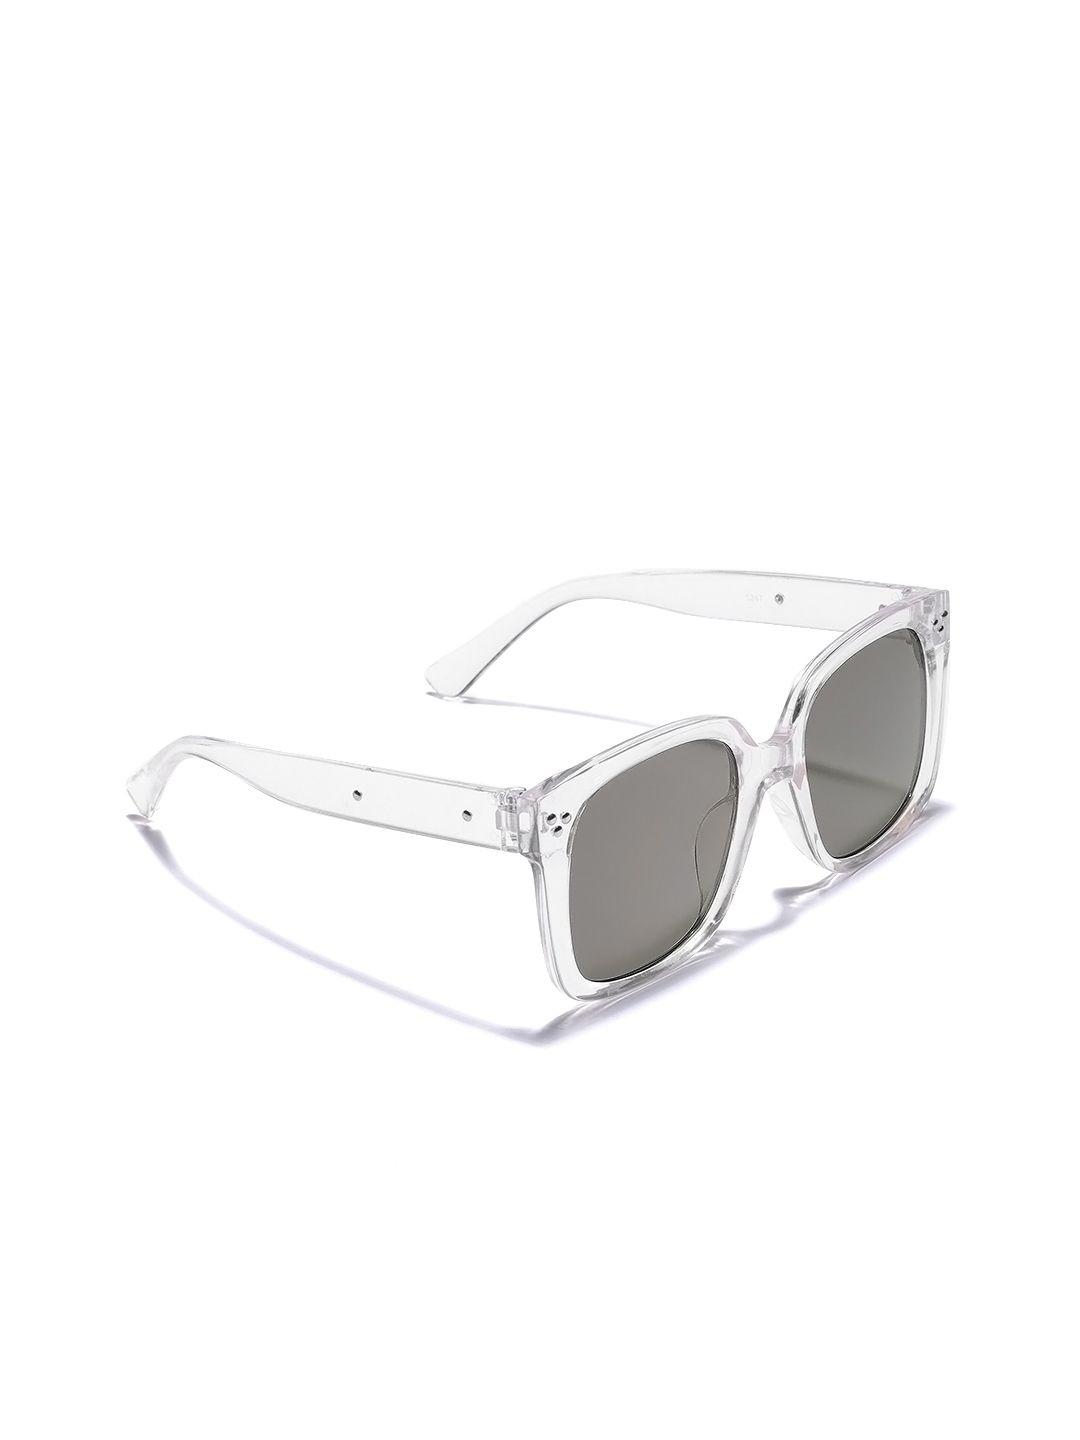 dressberry unisex black lens & silver-toned rectangle sunglasses with uv protected lens